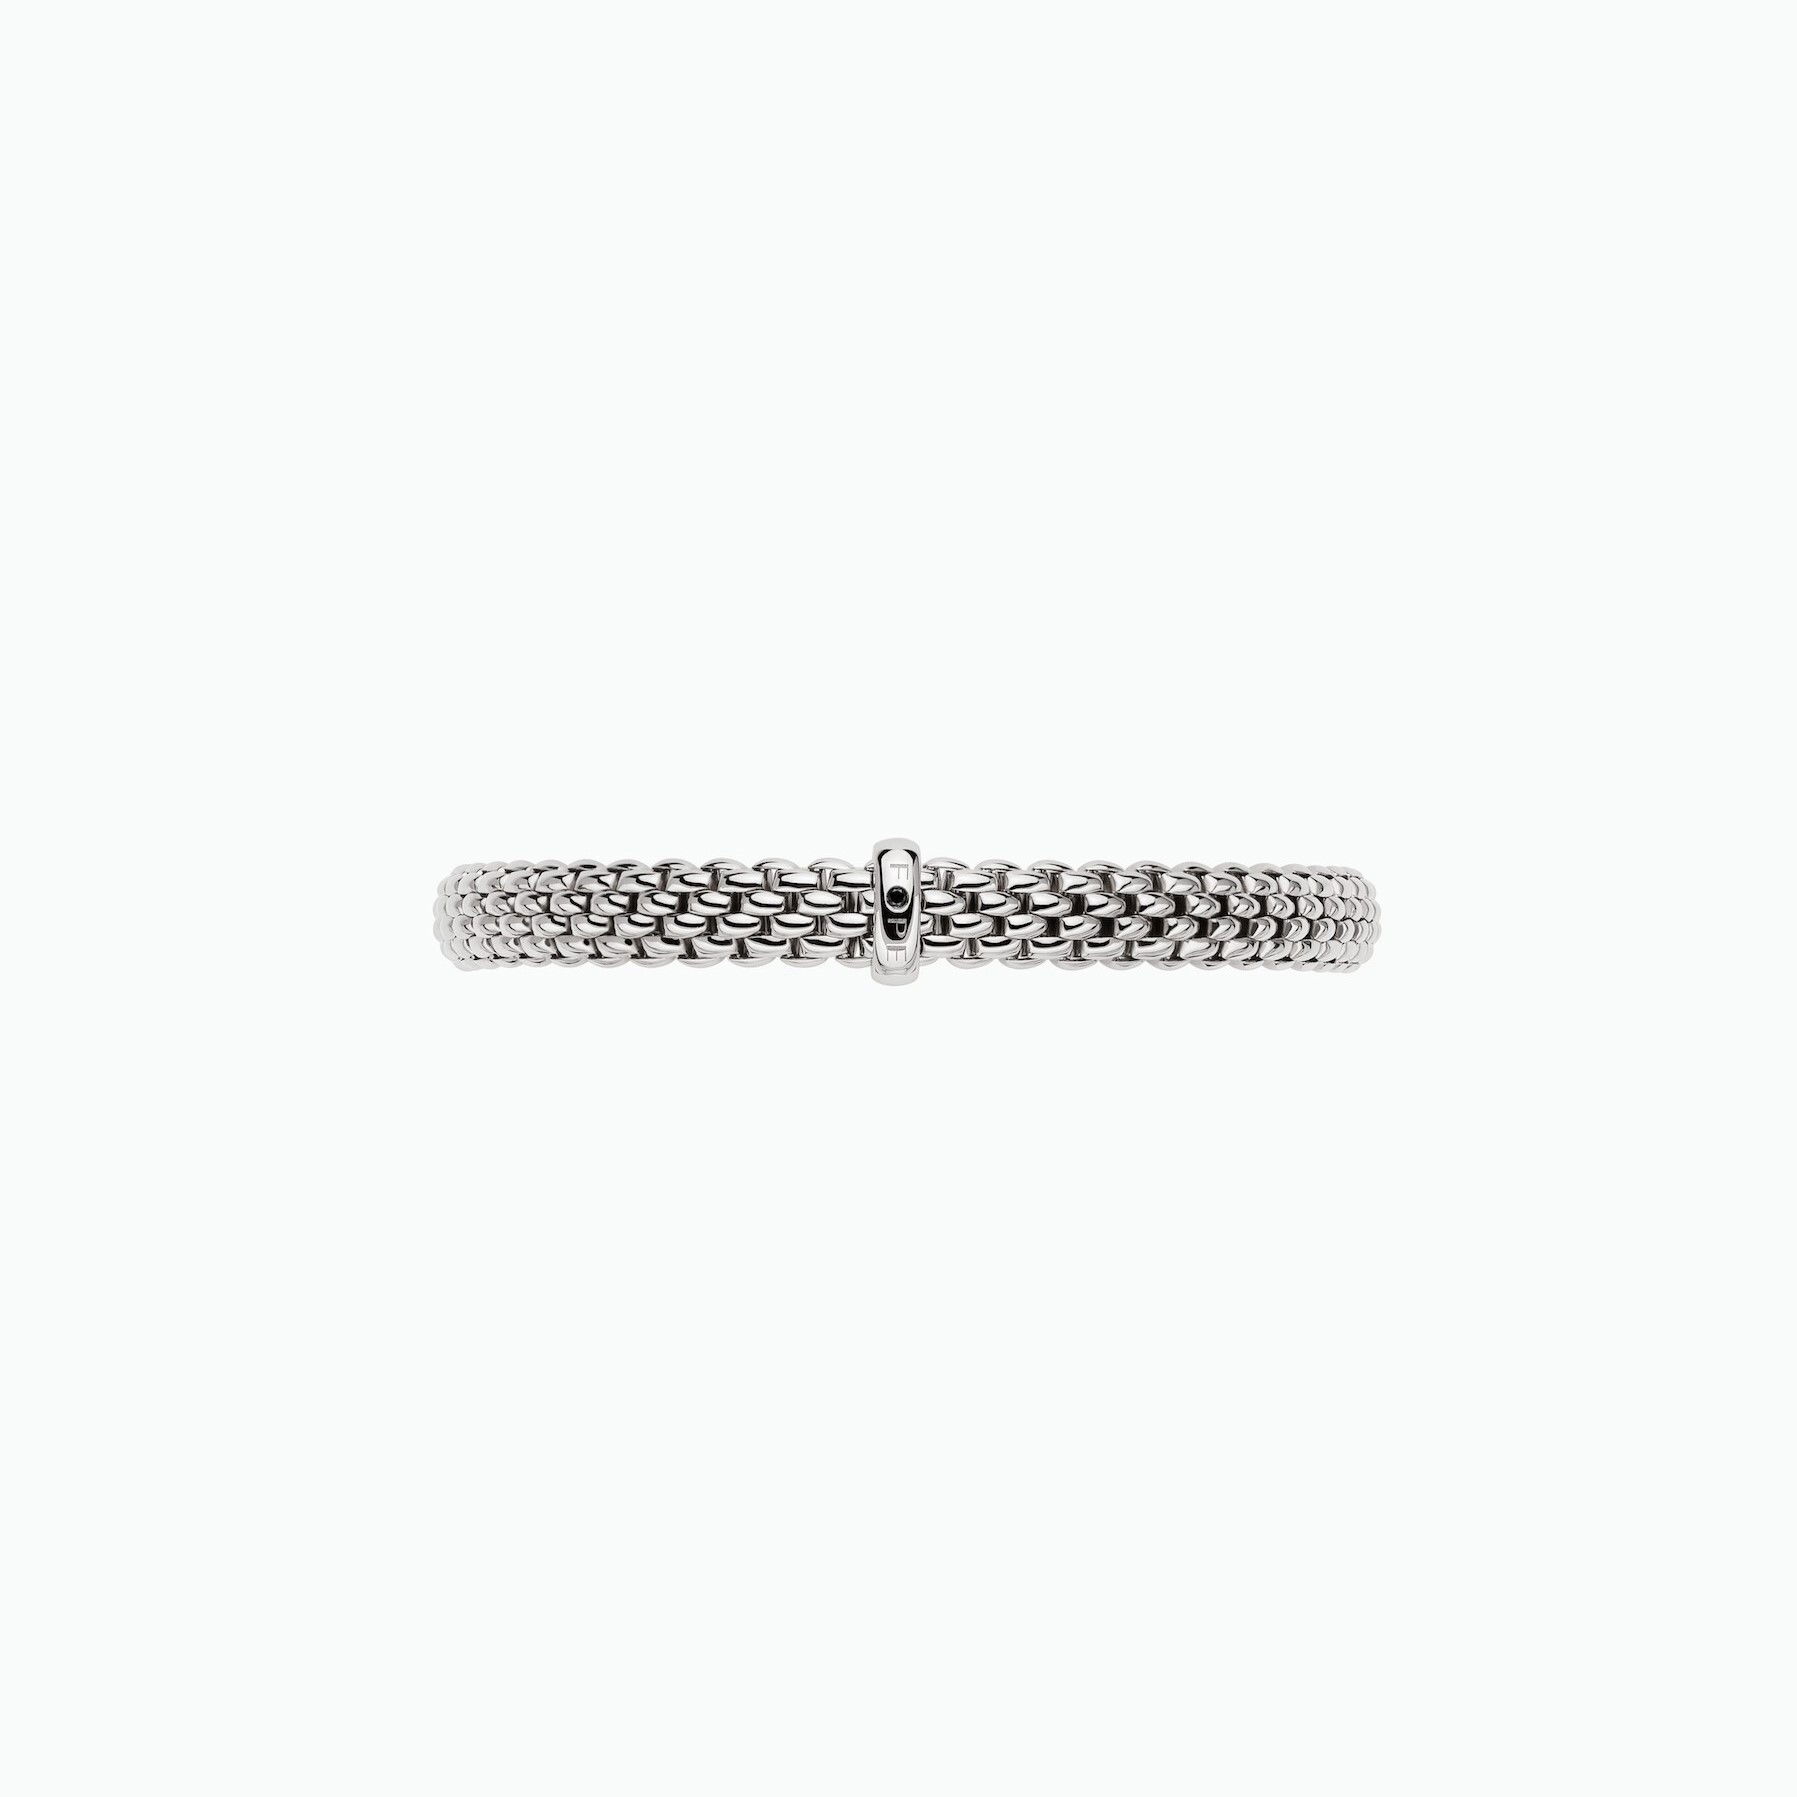 Vendome Bracelet in 18kt White Gold with 1 White Gold and Single Black Diamond Element - 6.9mm - Size L